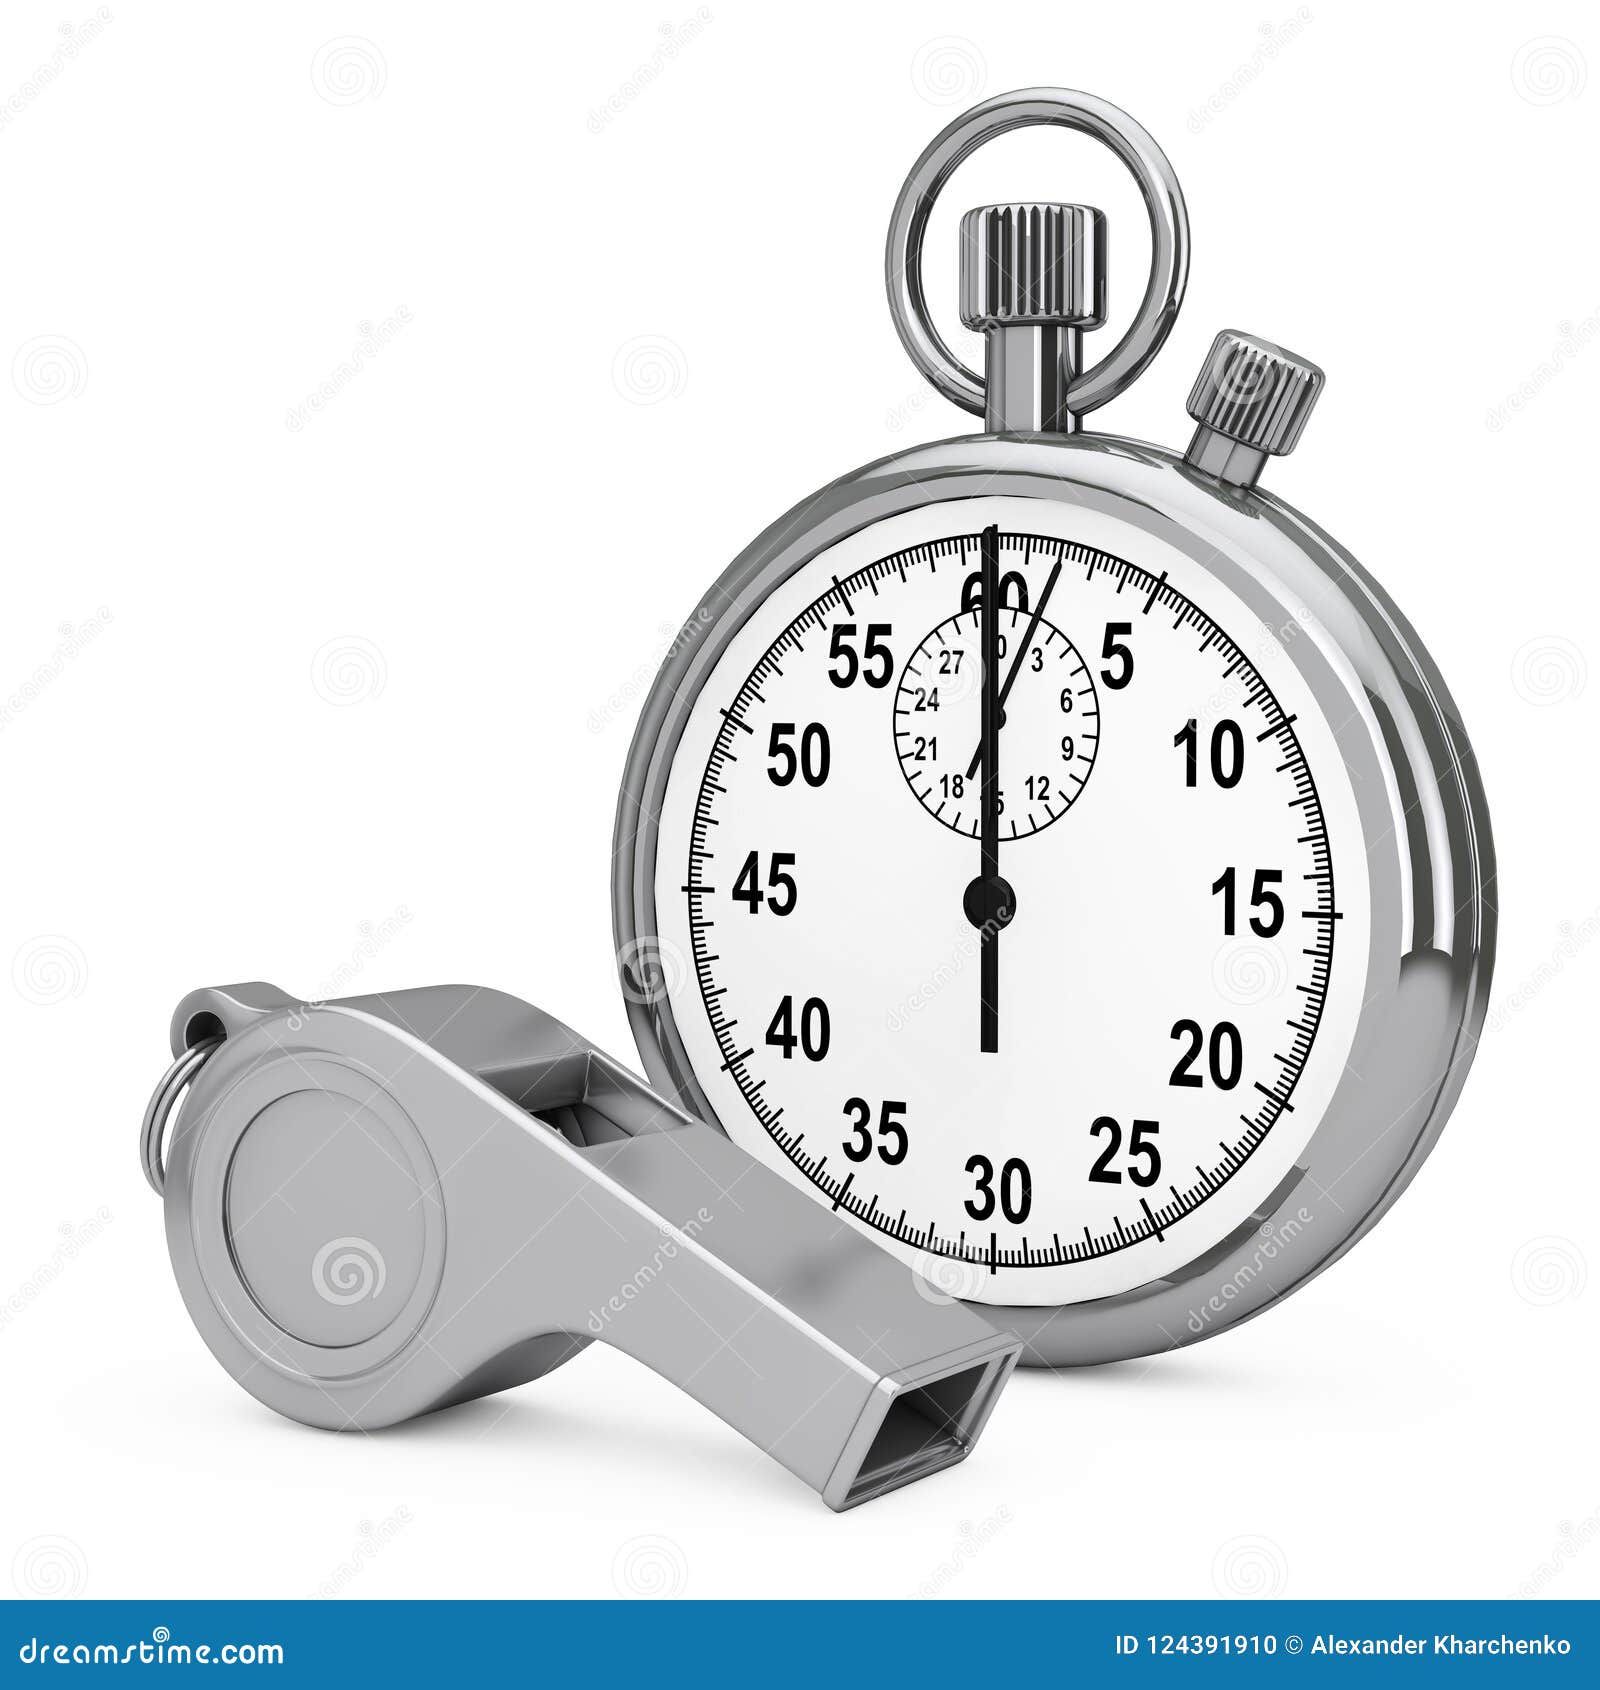 classic metal coaches whistle near chrome stopwatch. 3d rendering